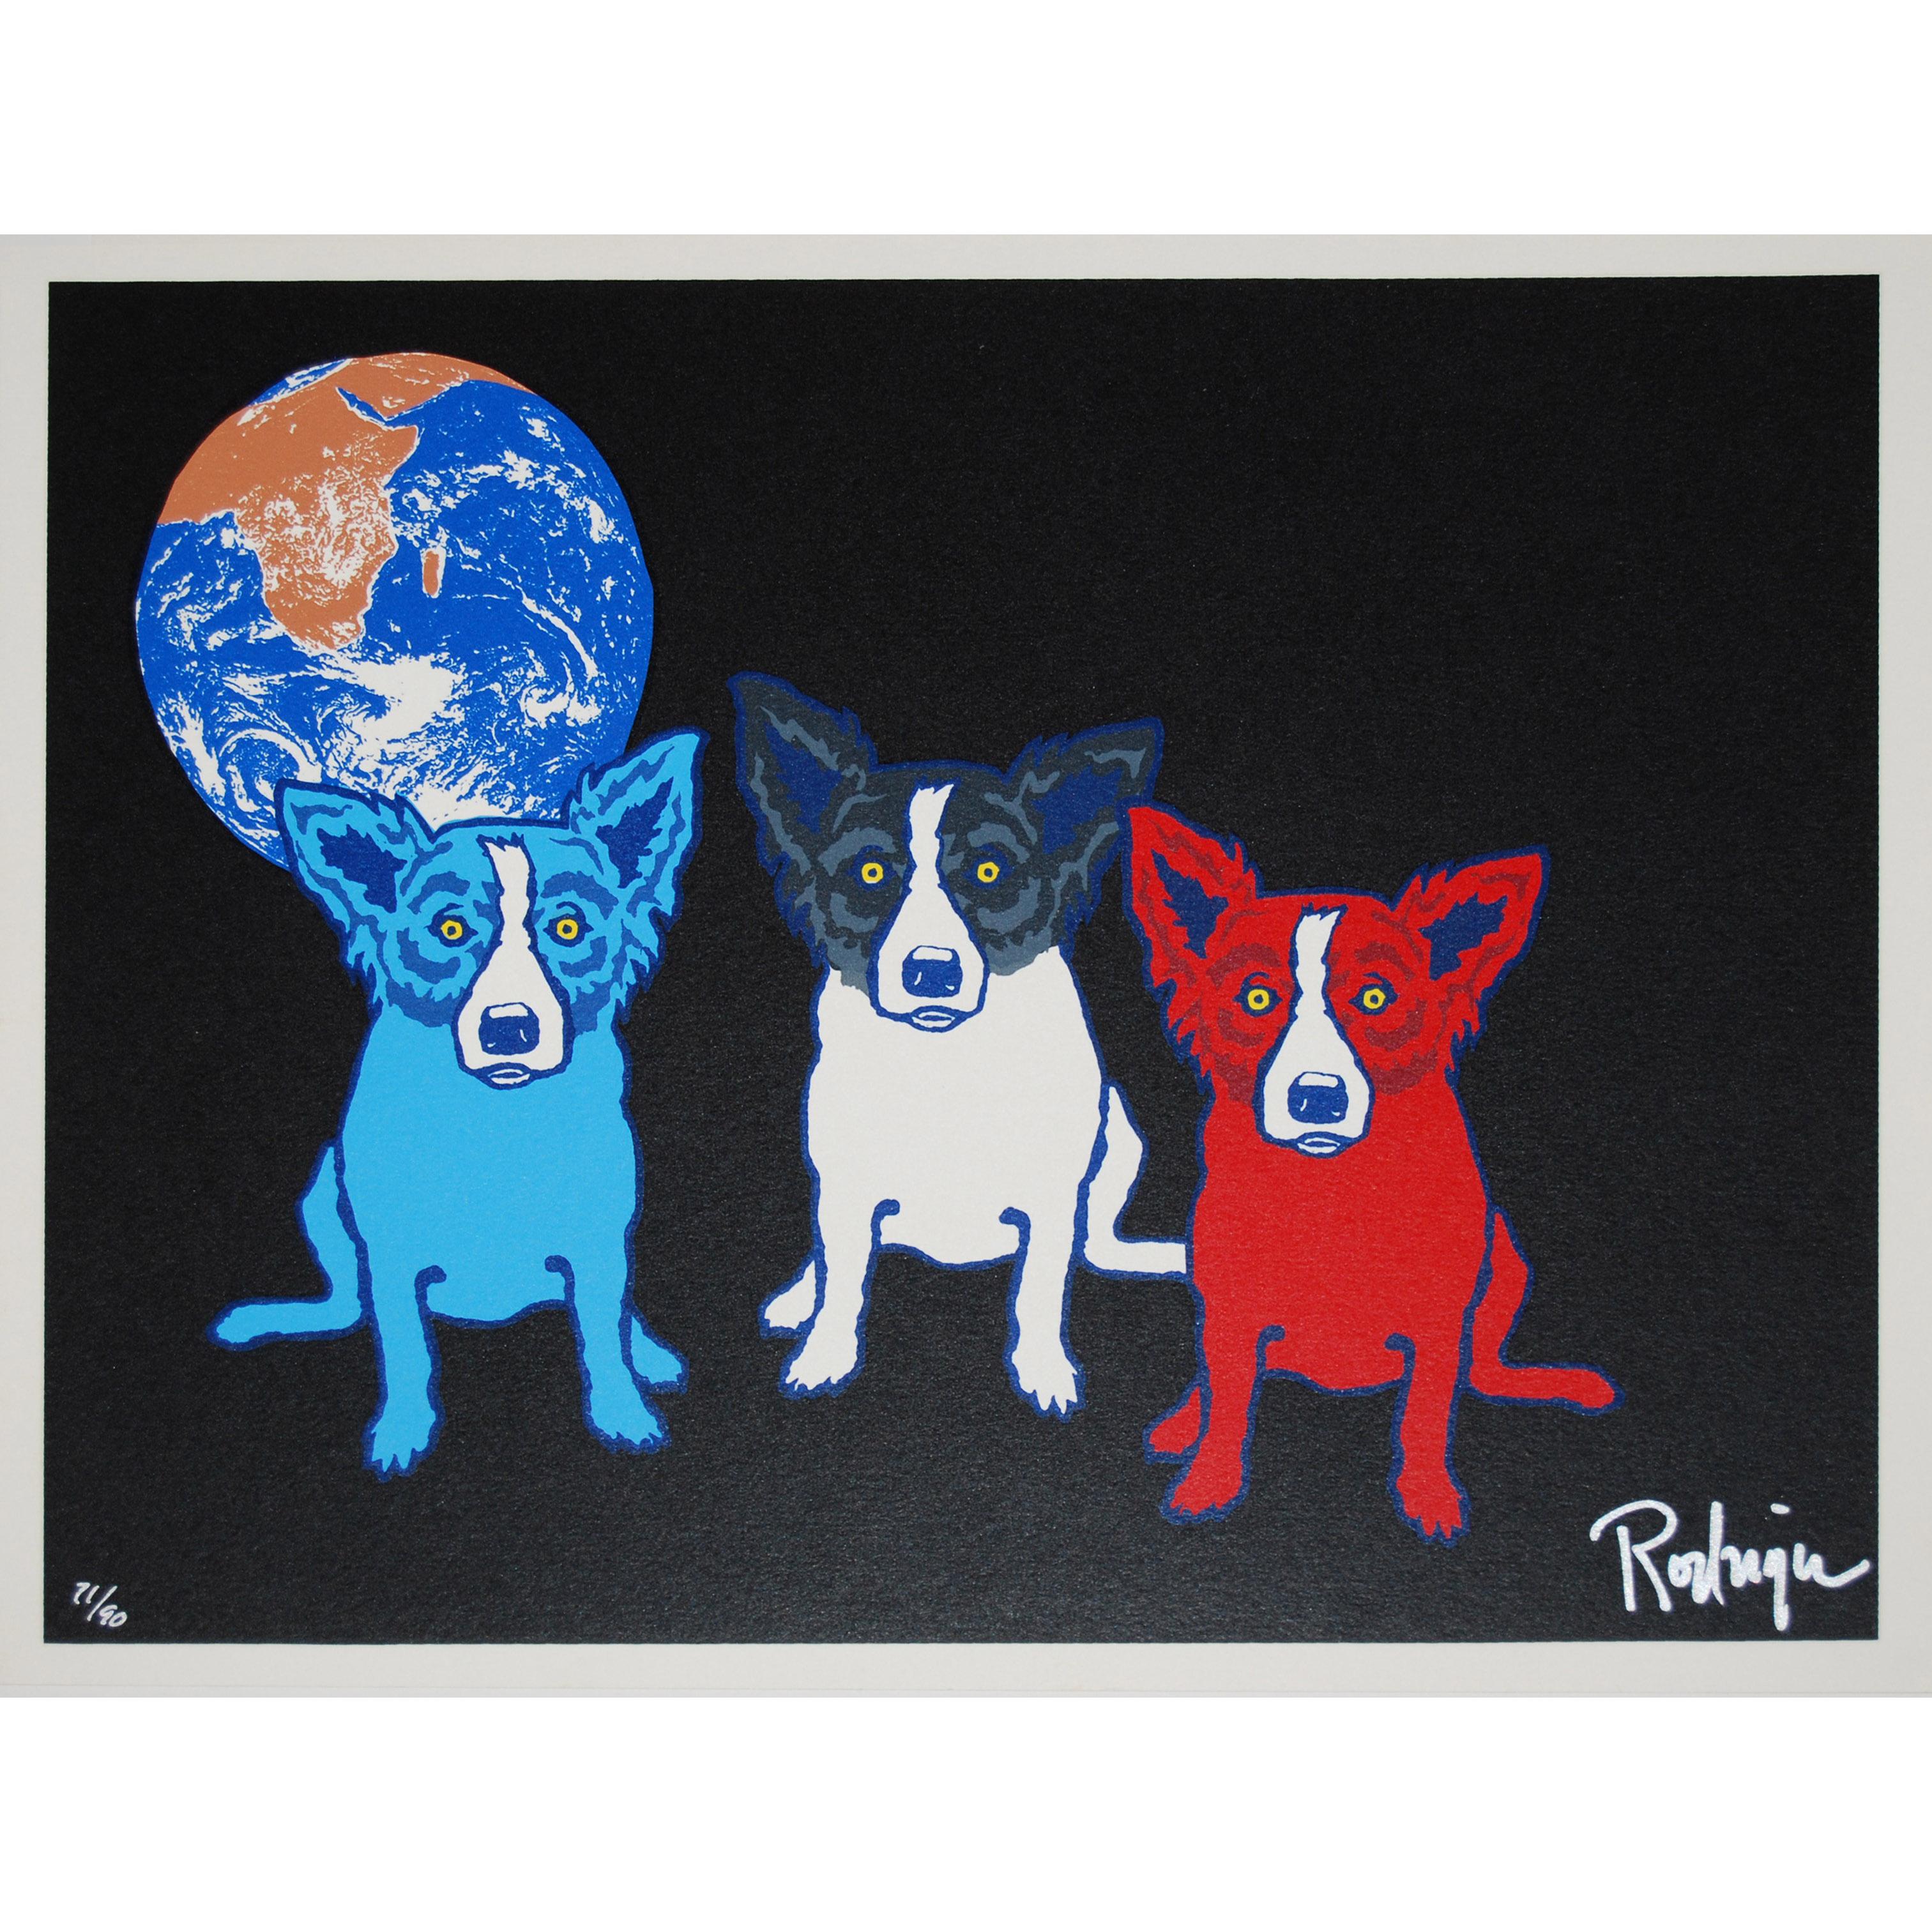 George Rodrigue Animal Print - Looking For the Moon - Signed Silkscreen Print Blue Dog